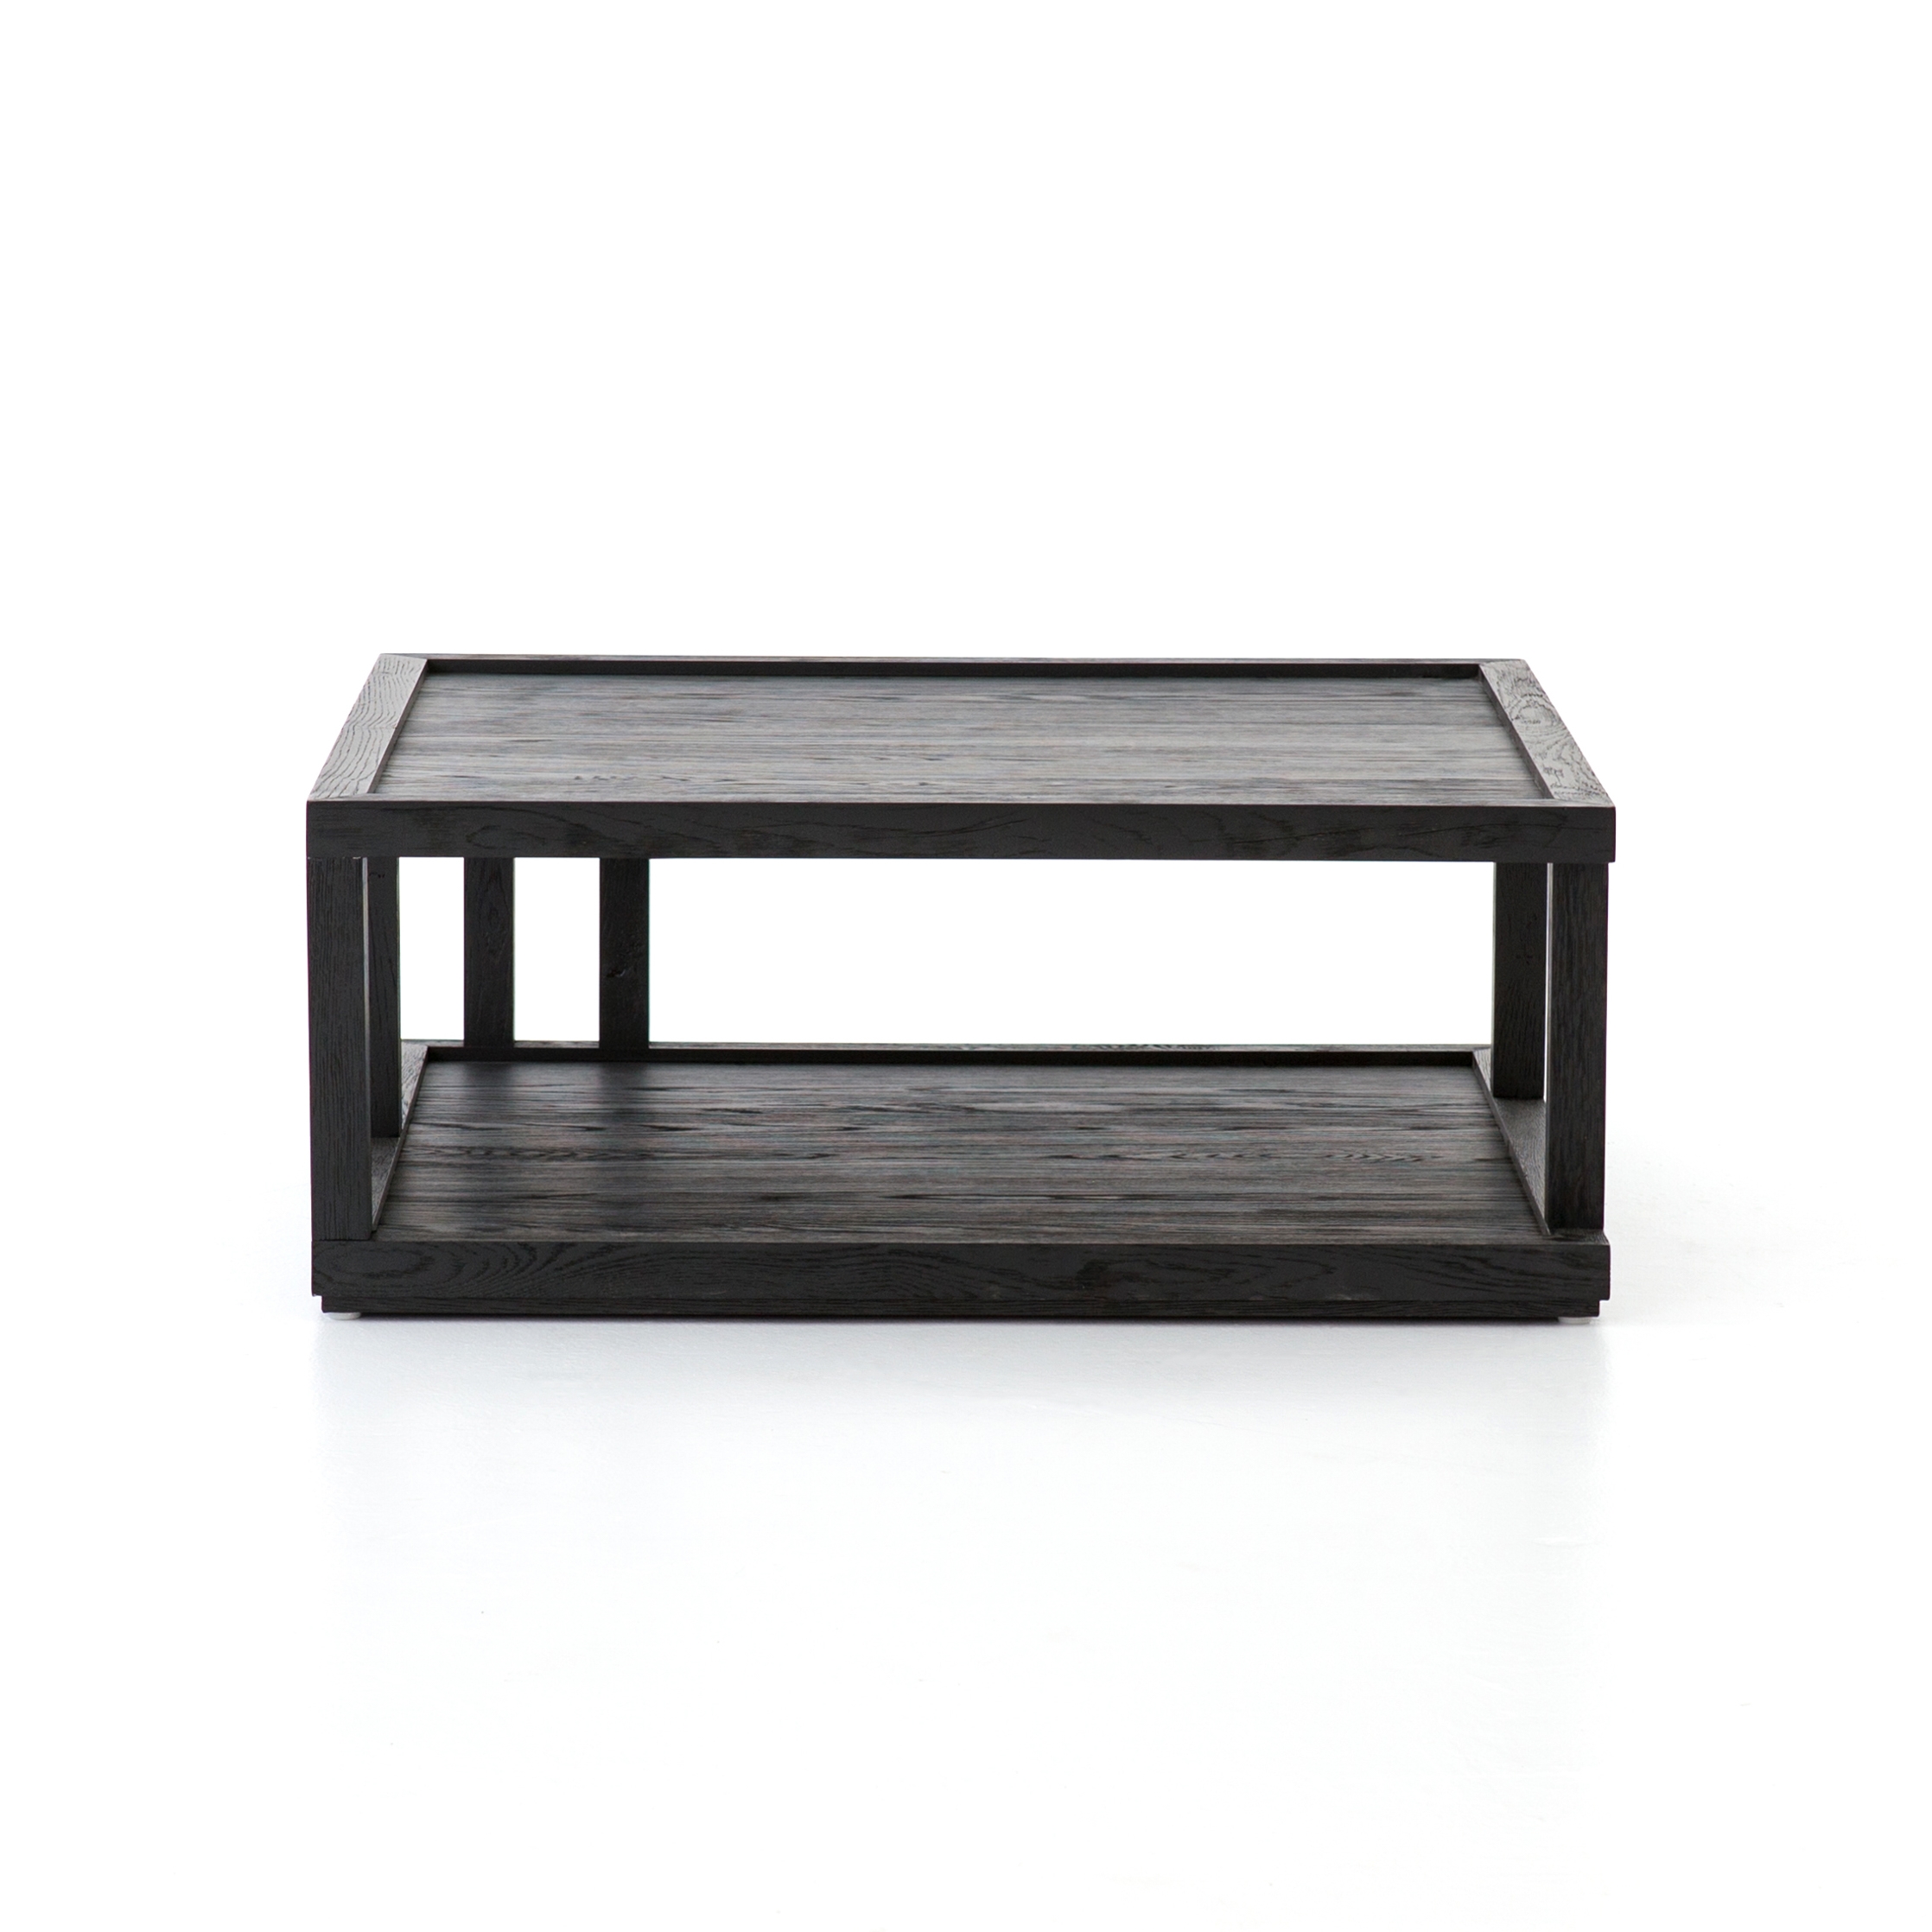 Charley Coffee Table-Drifted Black - Image 6